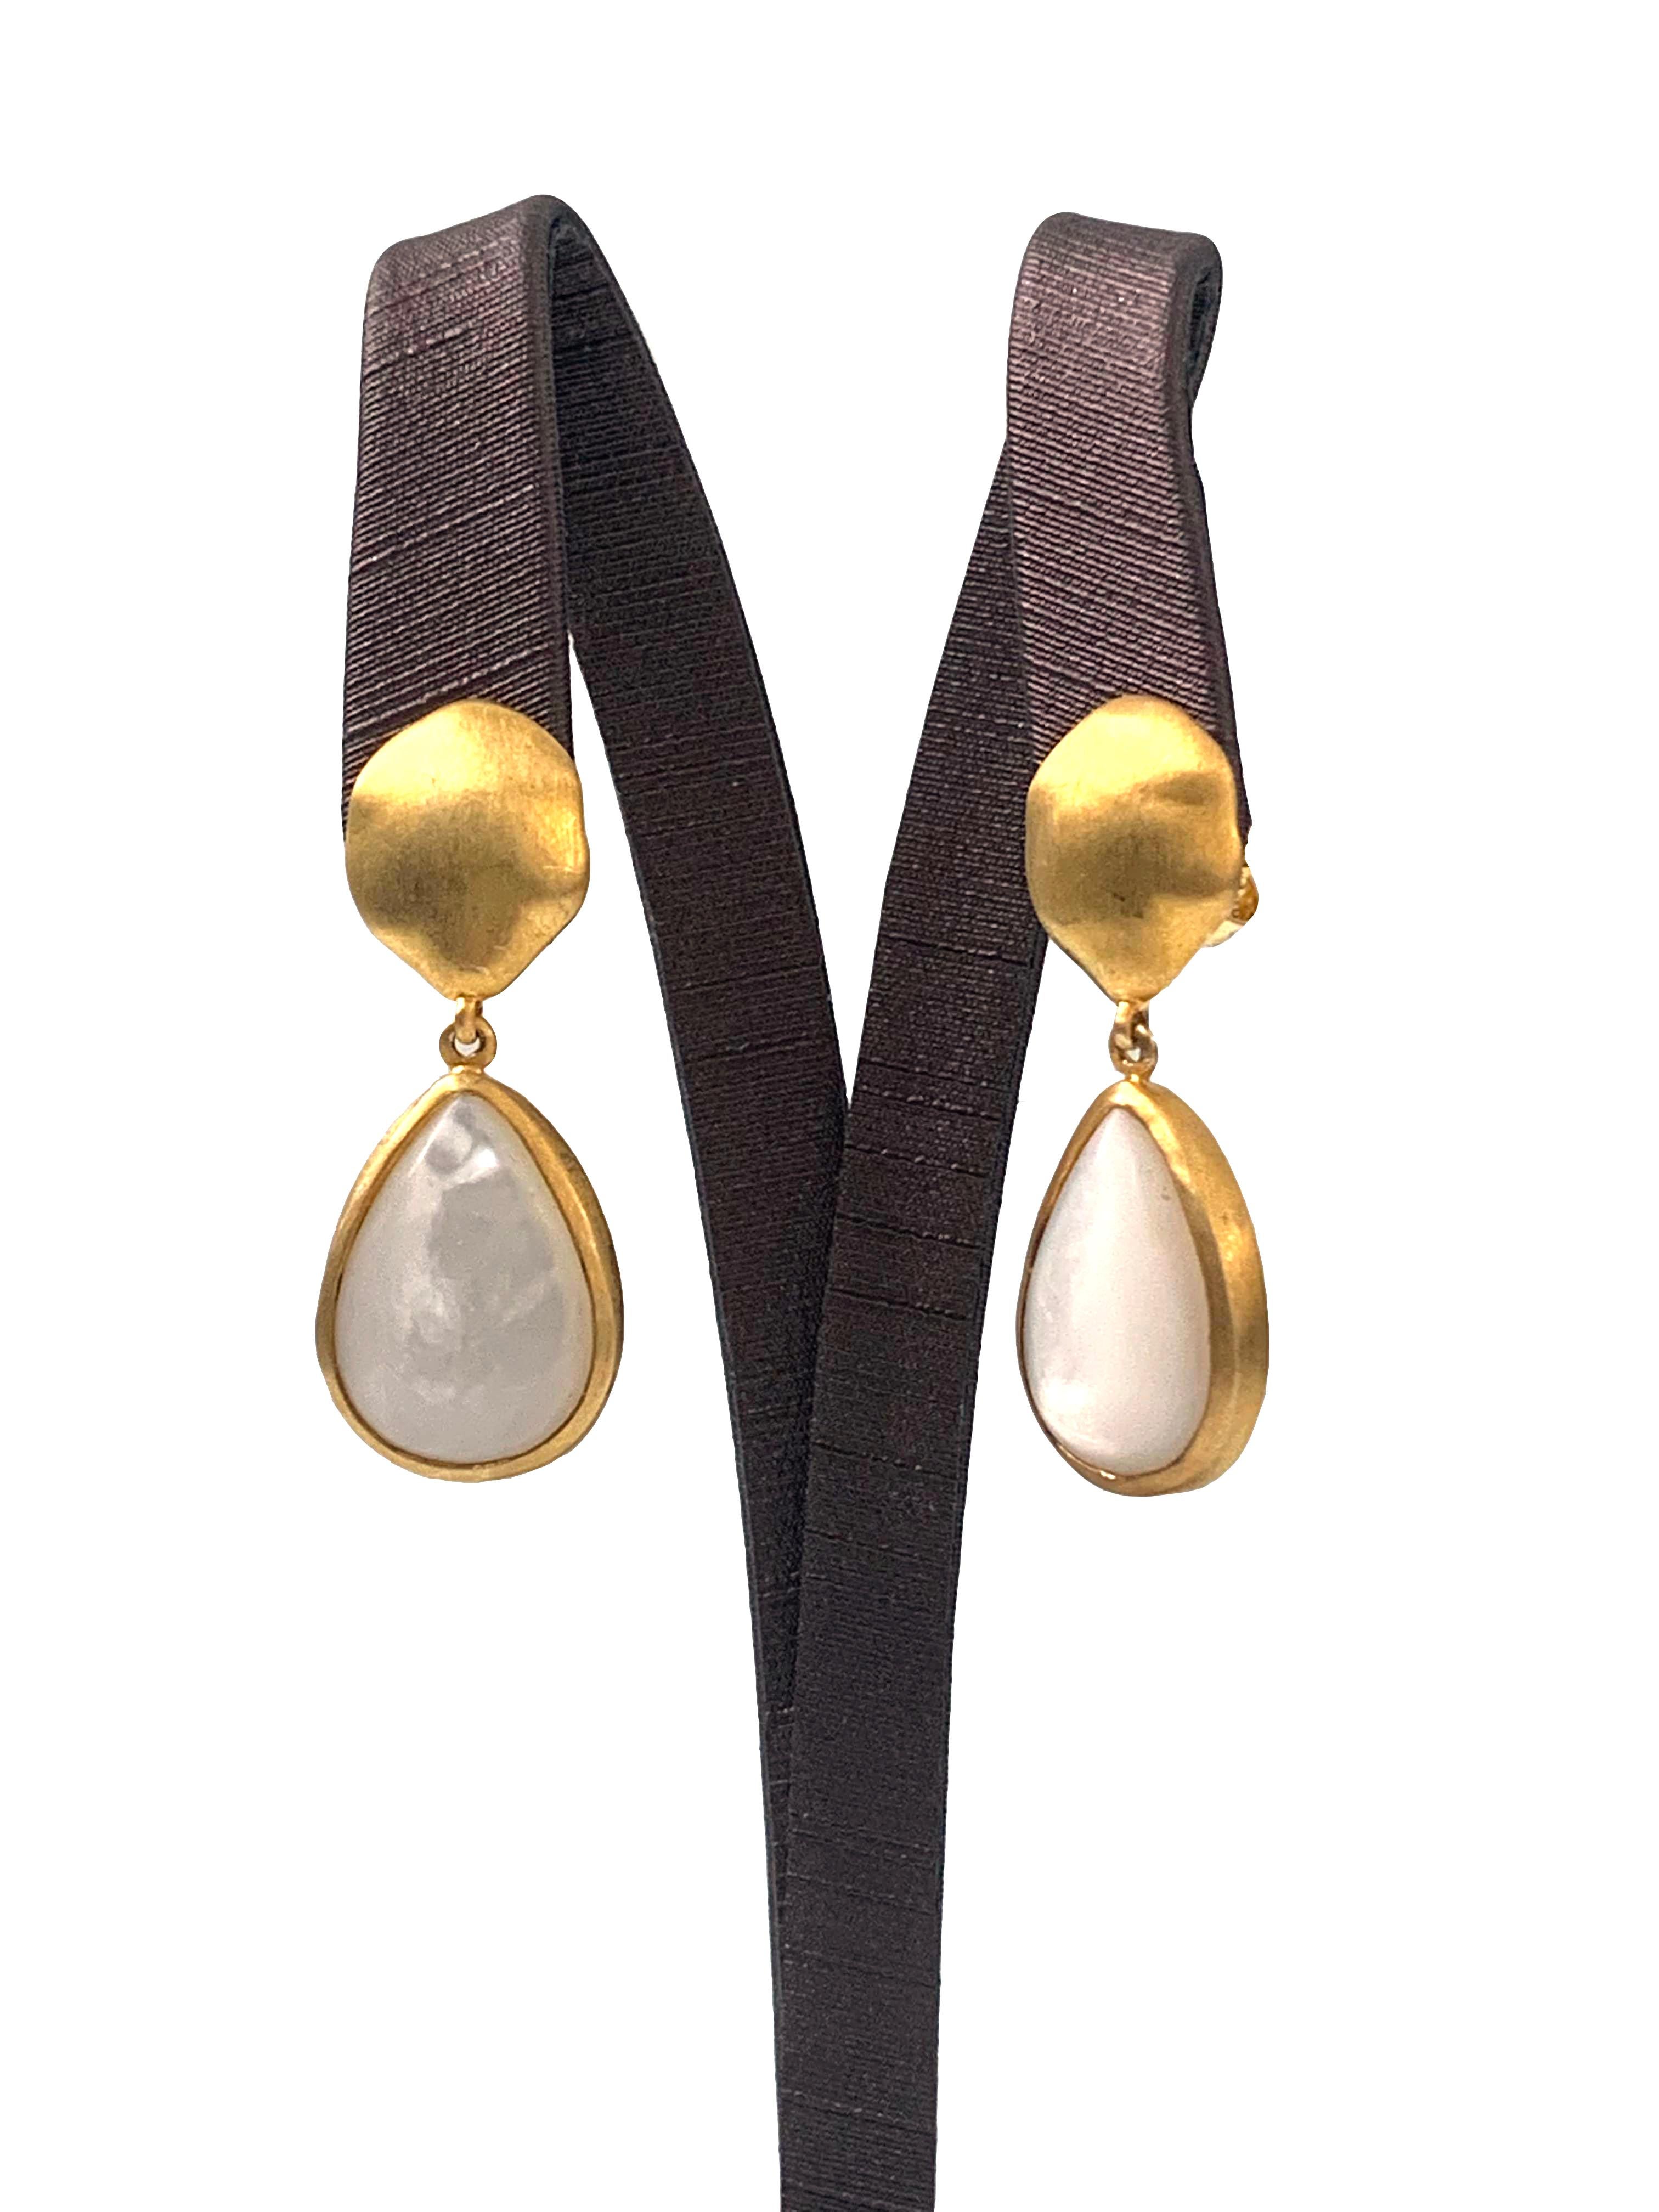 Discover pear-shape Mother of Pearl vermeil drop earrings. The earrings feature 2 large pear-shape cabochon-cut Mother of Pearl with unique and beautiful luster, handcrafted brushed satin texturing technique, and hand set in vermeil 18k gold plated